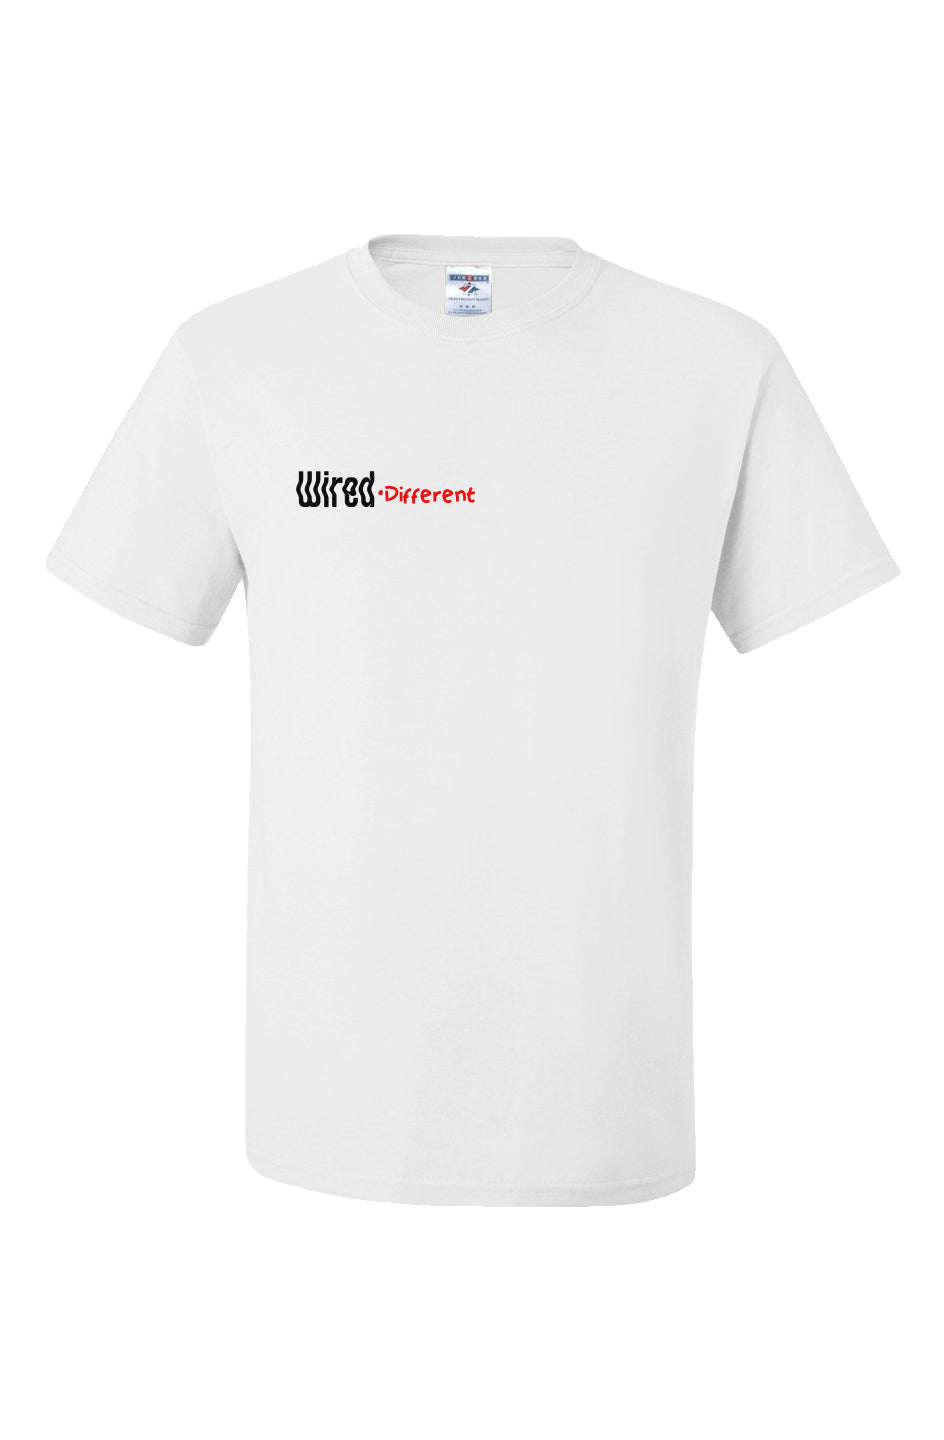 Guadua Wired•Different Tee_White